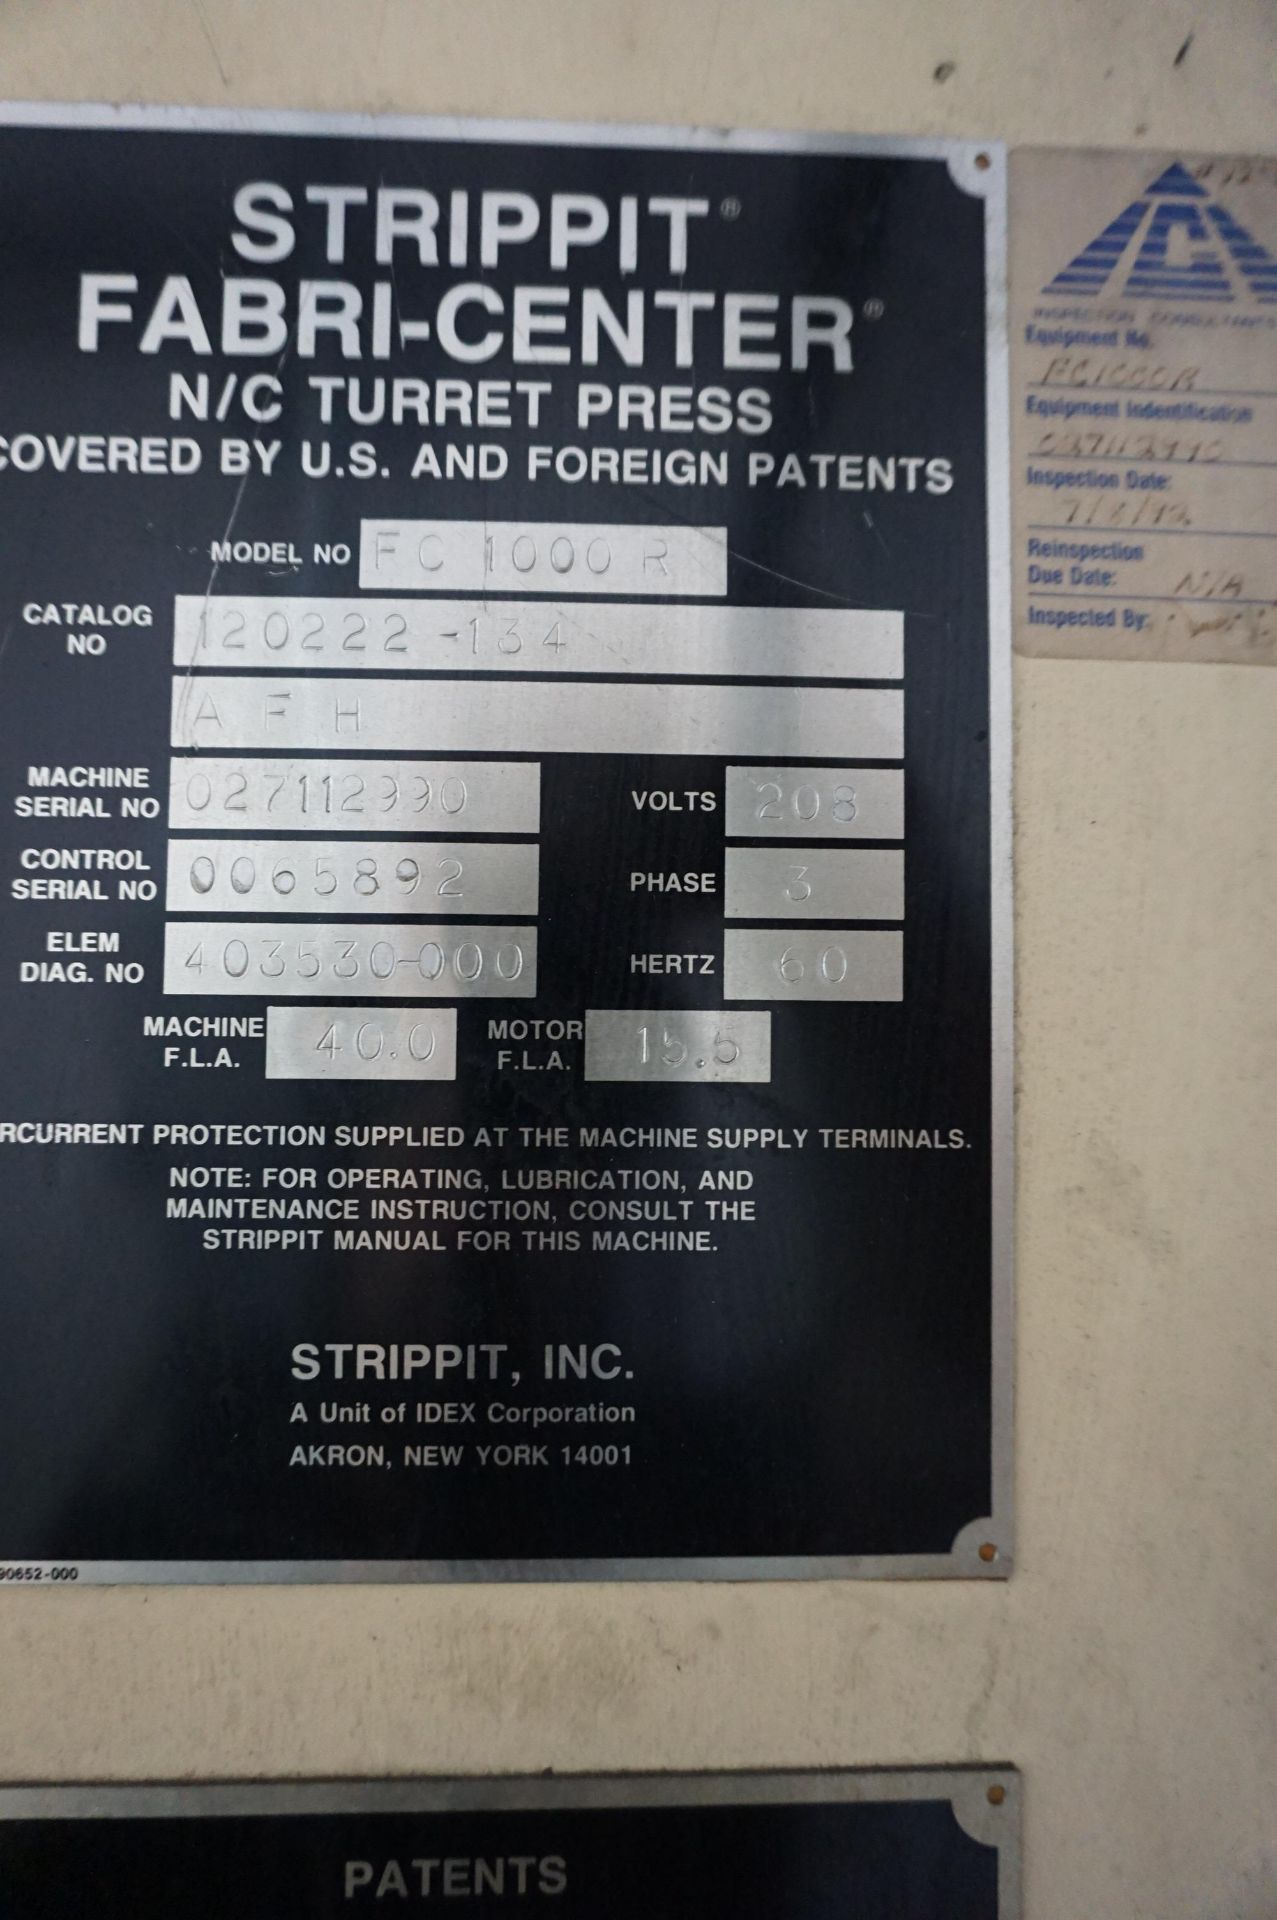 STRIPPIT FC 1000R TURRET PUNCH CATALOG NUMBER 120222-134, S/N 027112990, SLIM TOOLING *PLEASE NOTE - Image 10 of 11